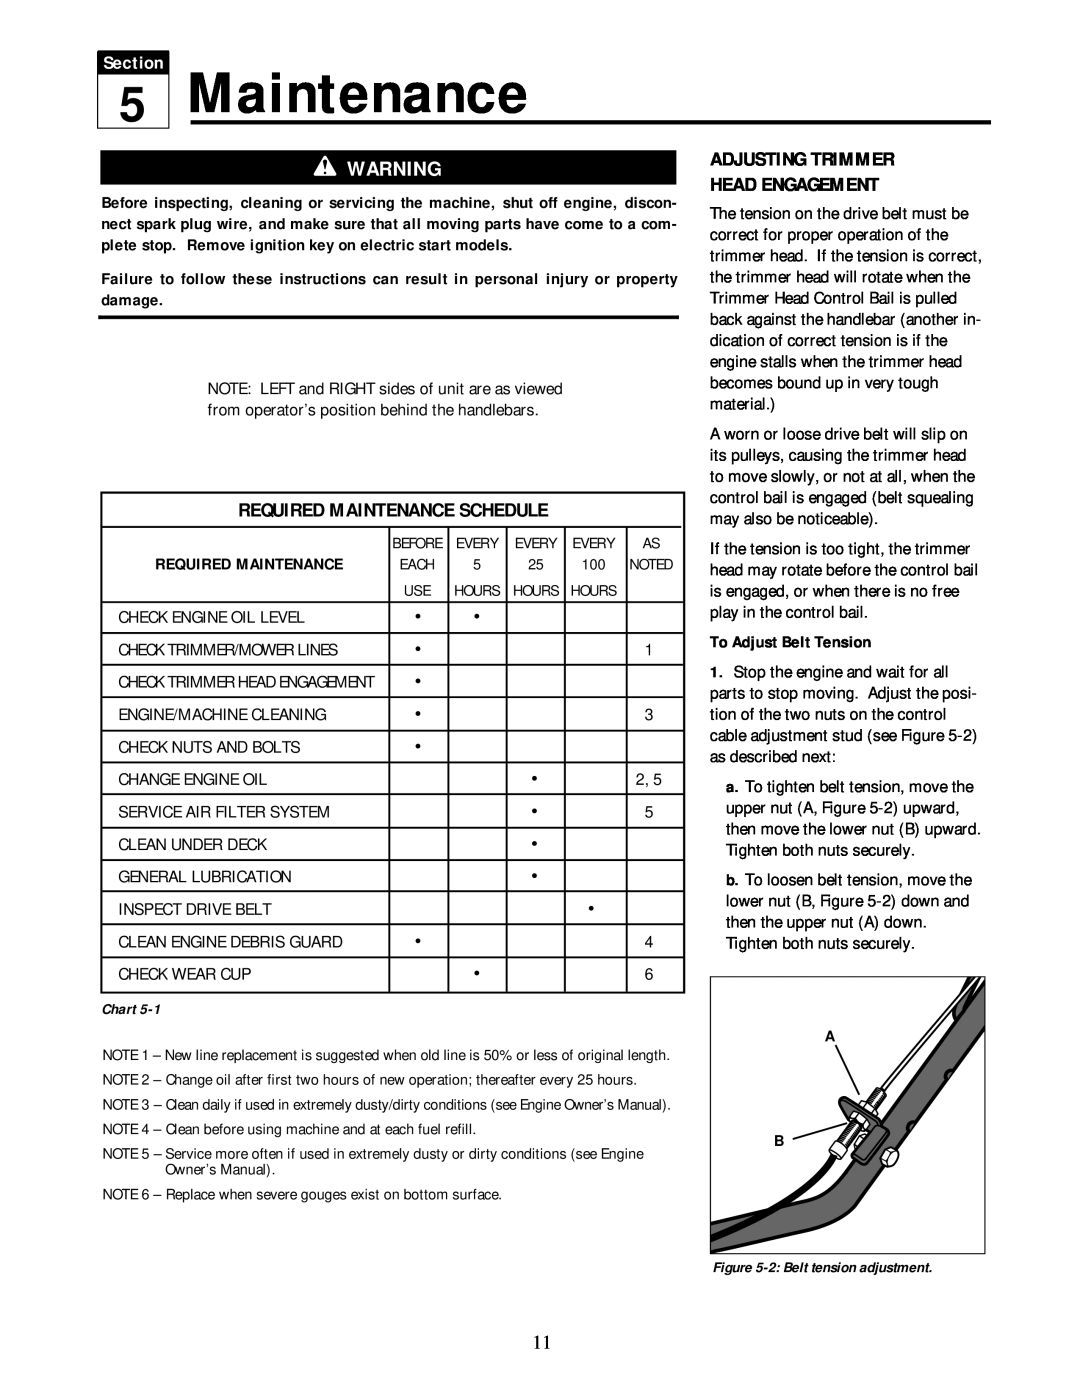 Troy-Bilt 52058, 52057 owner manual Required Maintenance Schedule, Adjusting Trimmer Head Engagement, Section 